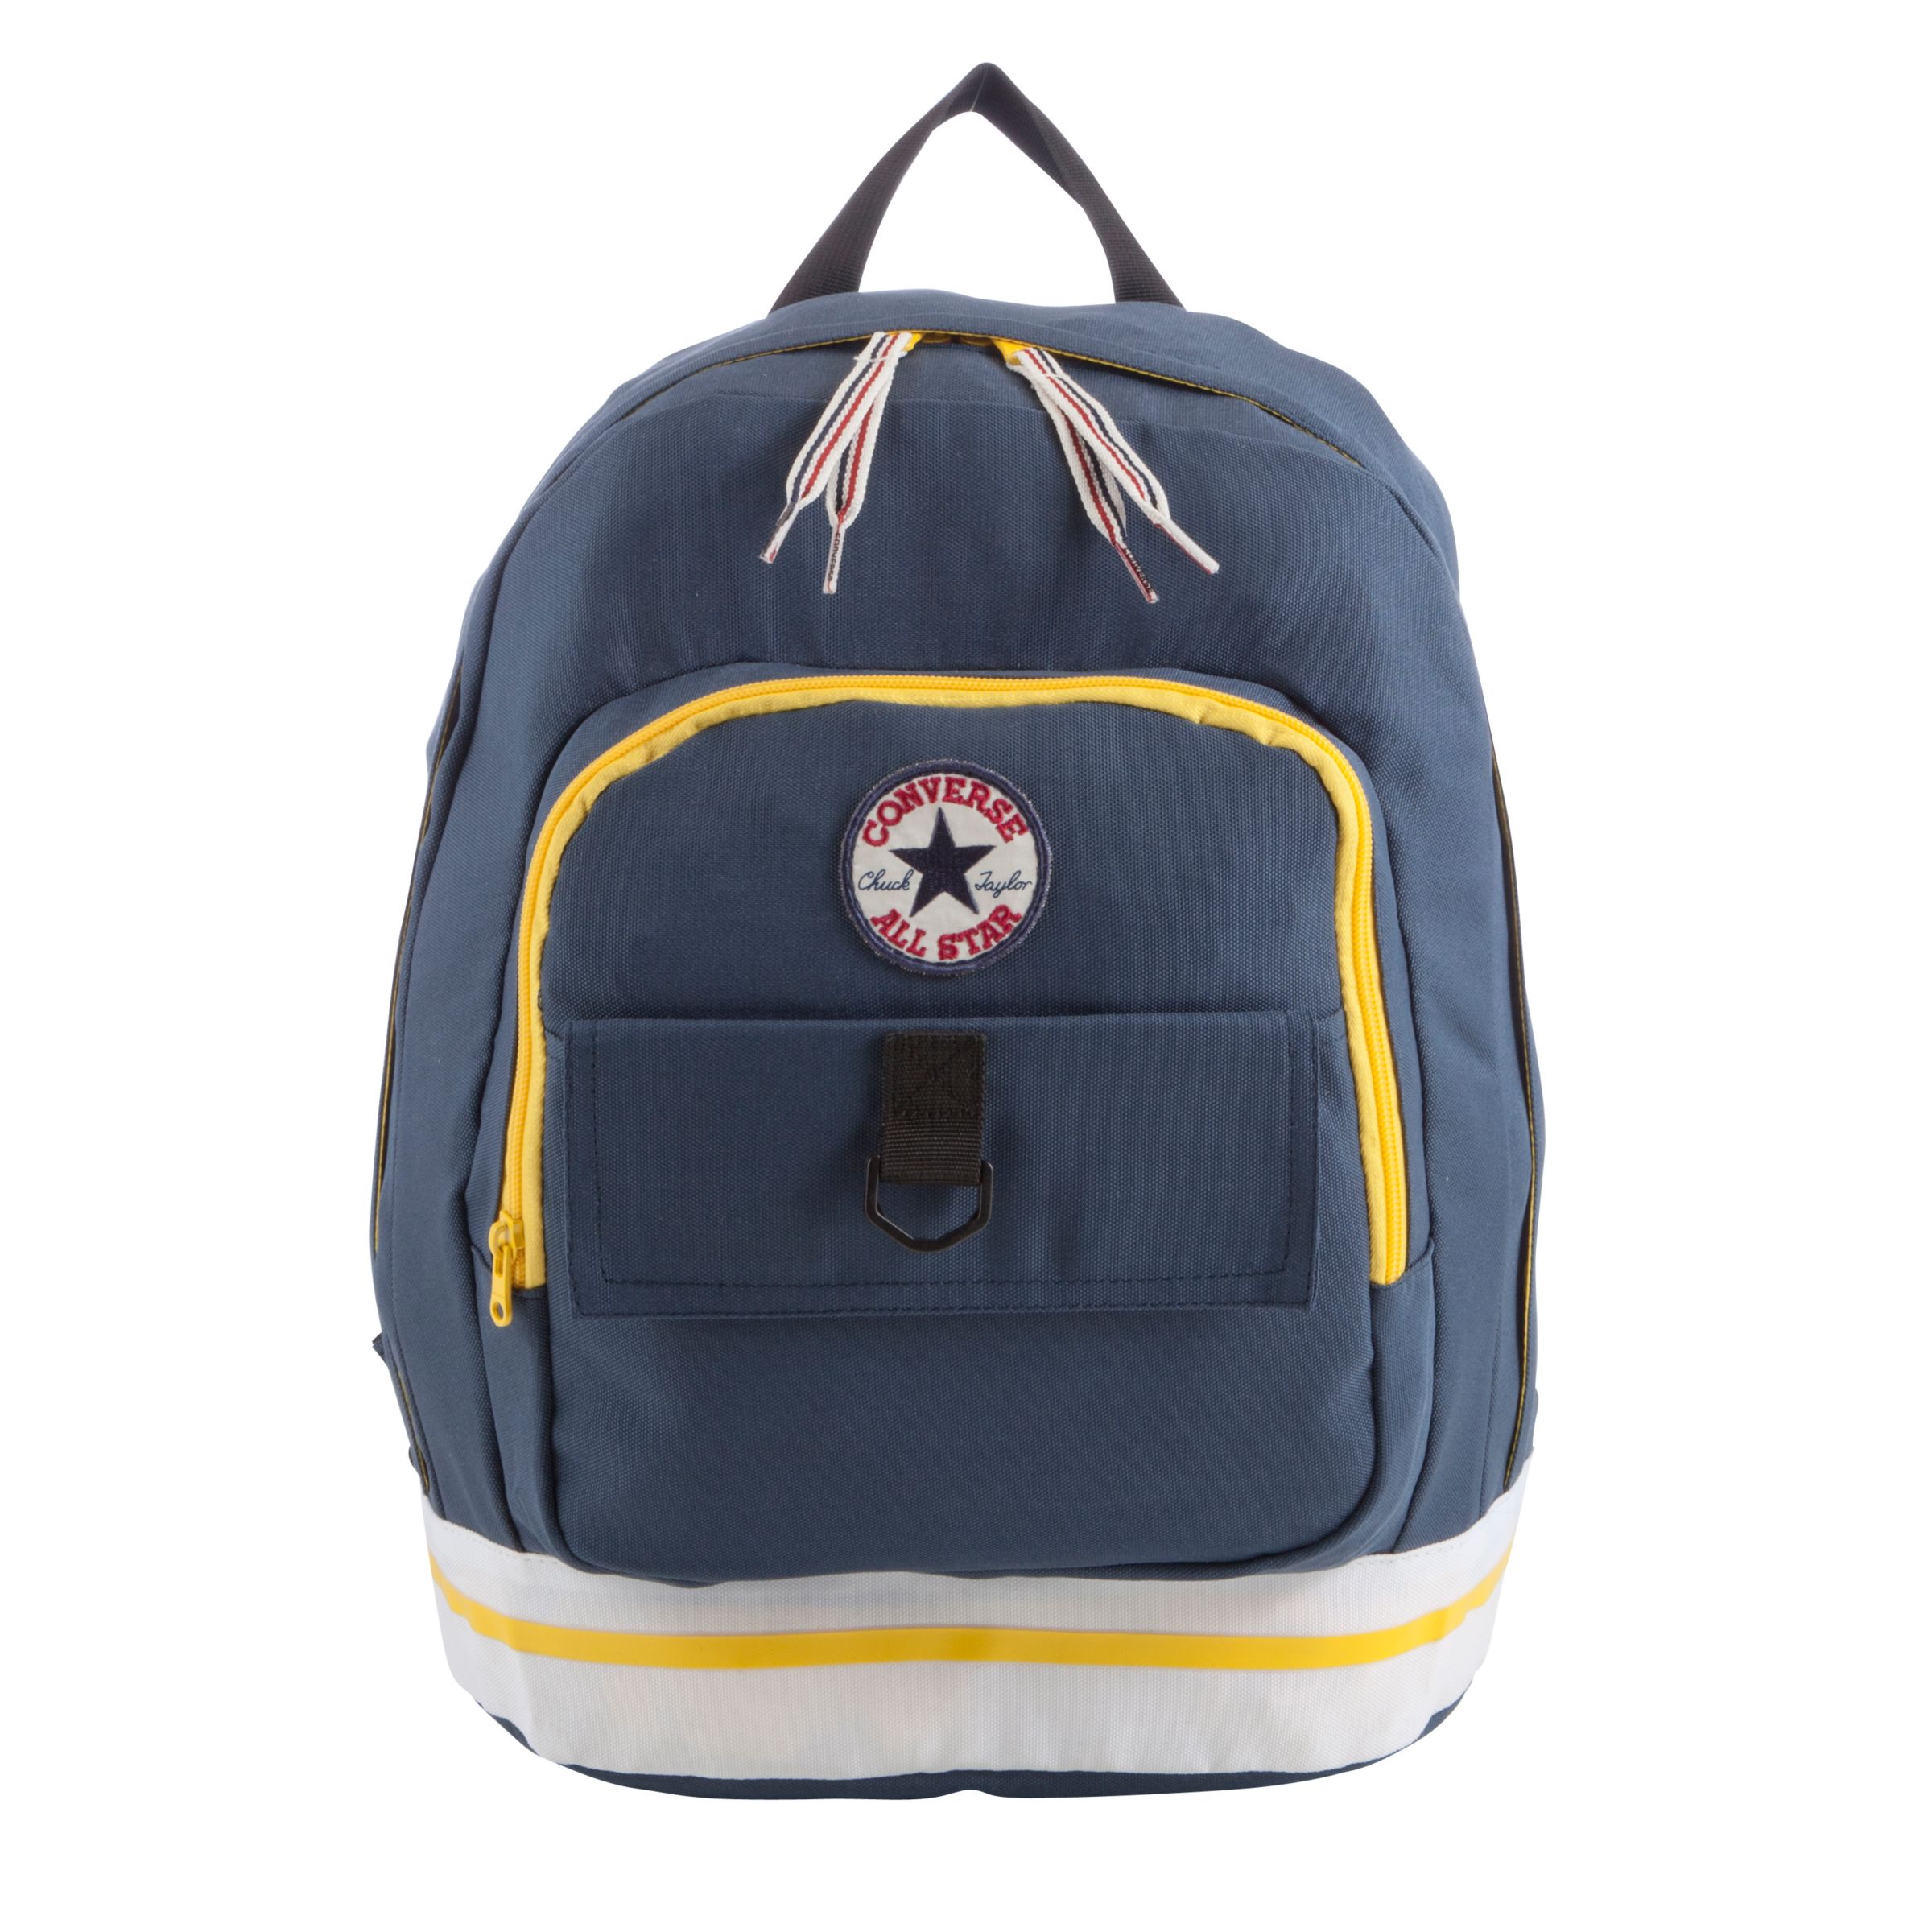 converse navy star backpack